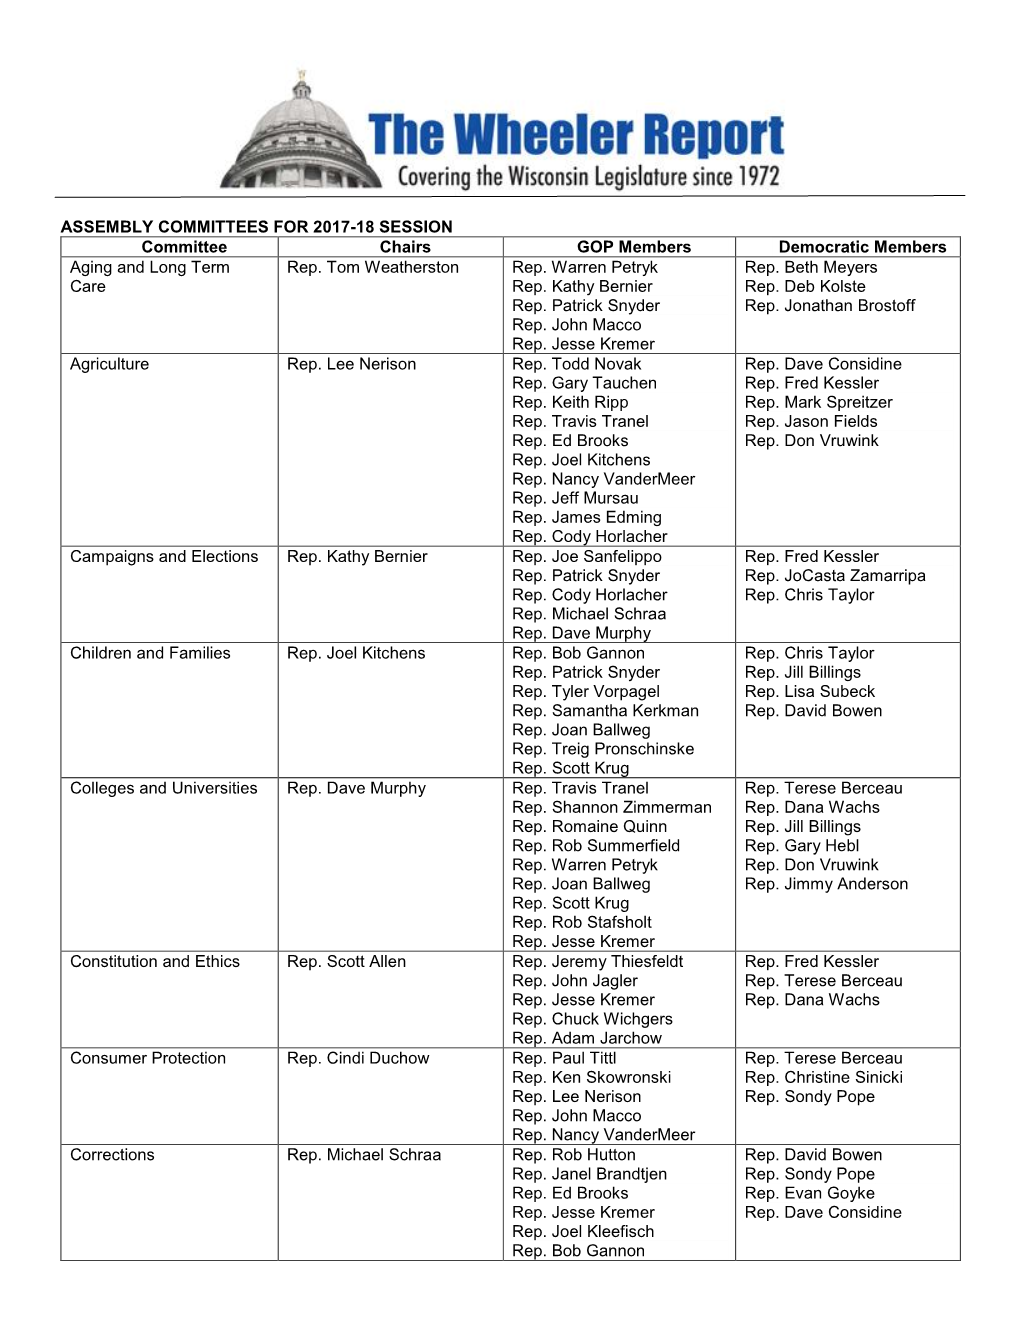 ASSEMBLY COMMITTEES for 2017-18 SESSION Committee Chairs GOP Members Democratic Members Aging and Long Term Rep